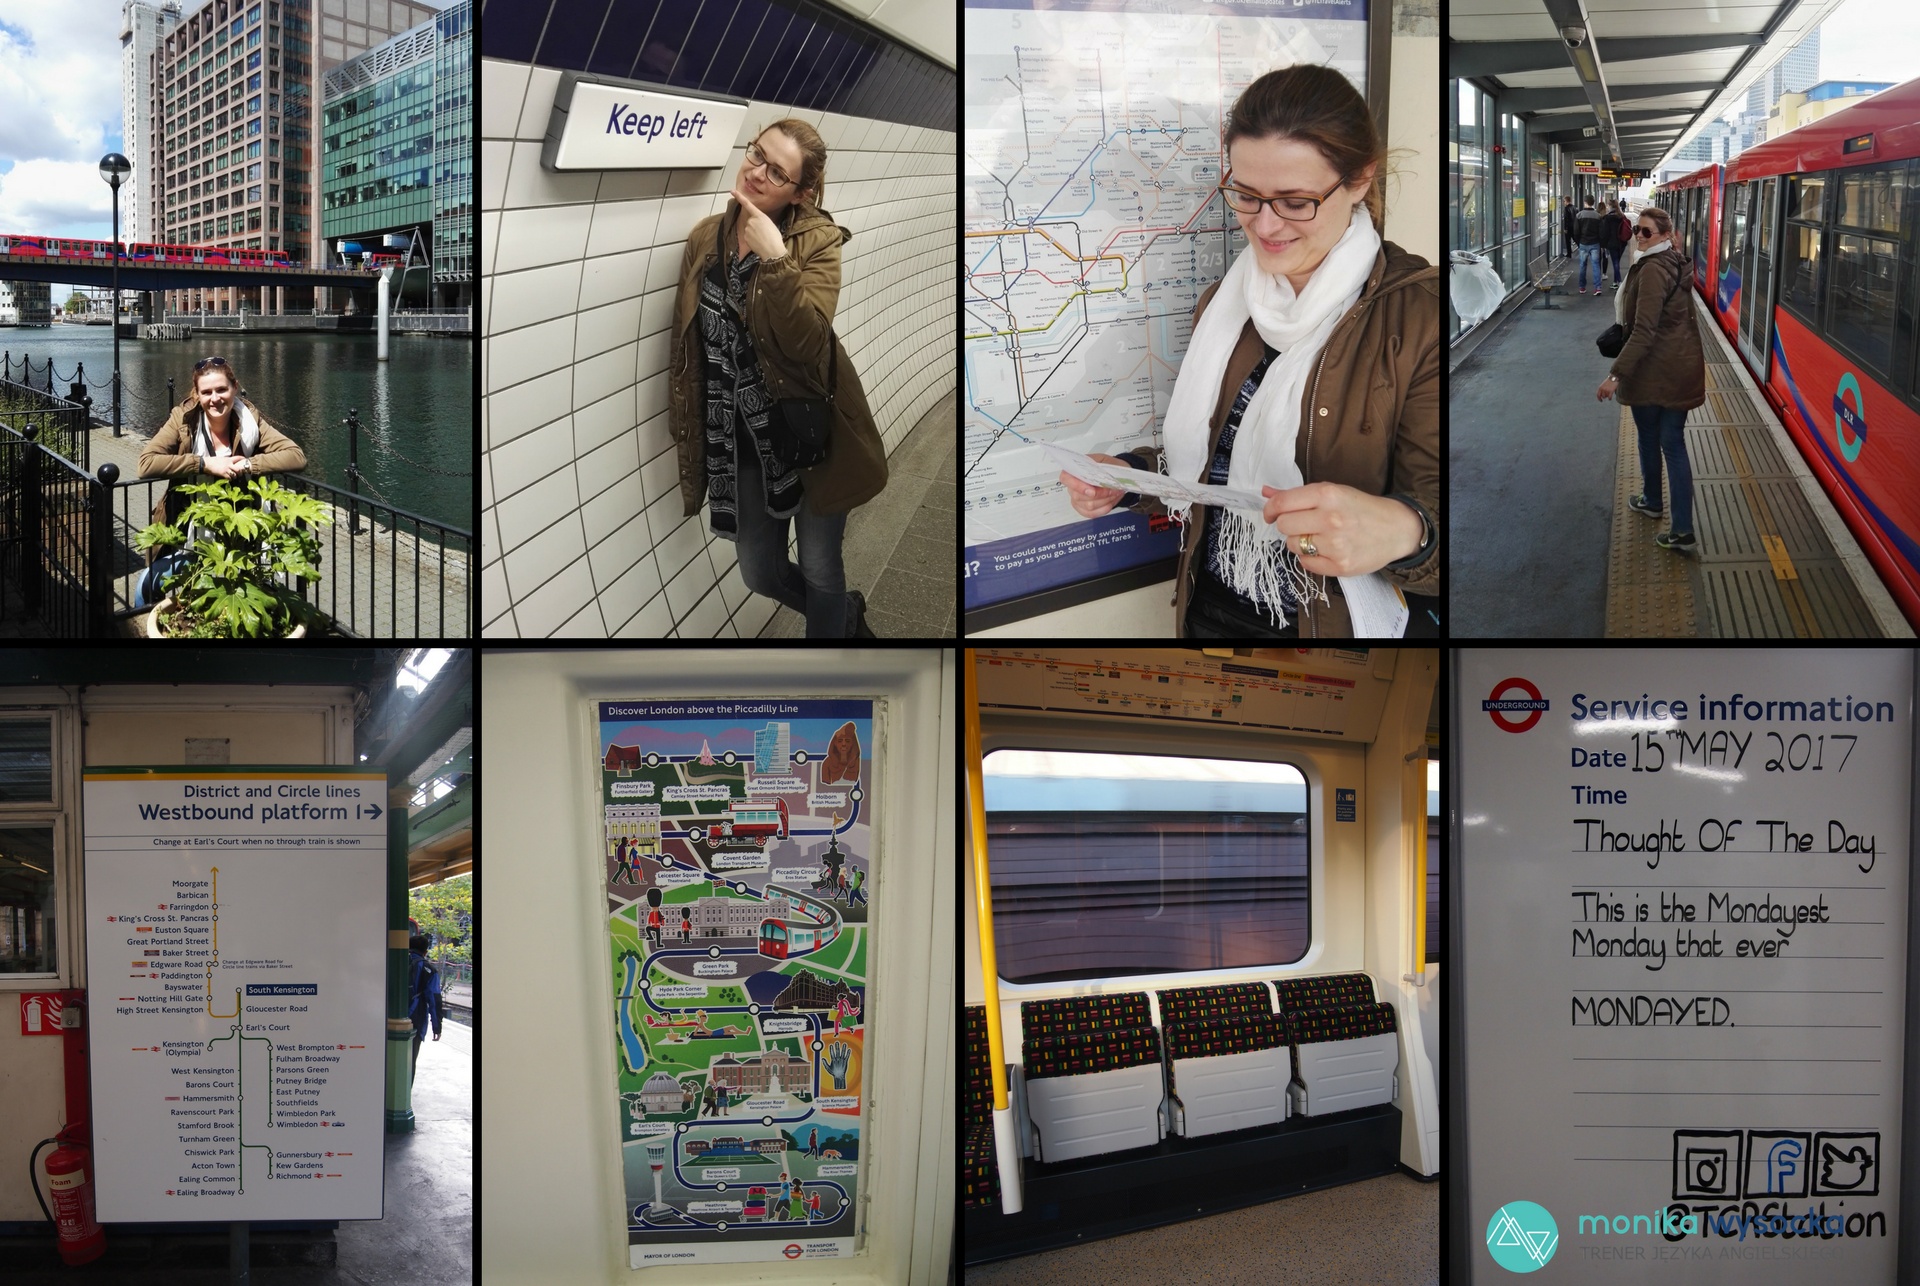 My pictures with London tube.